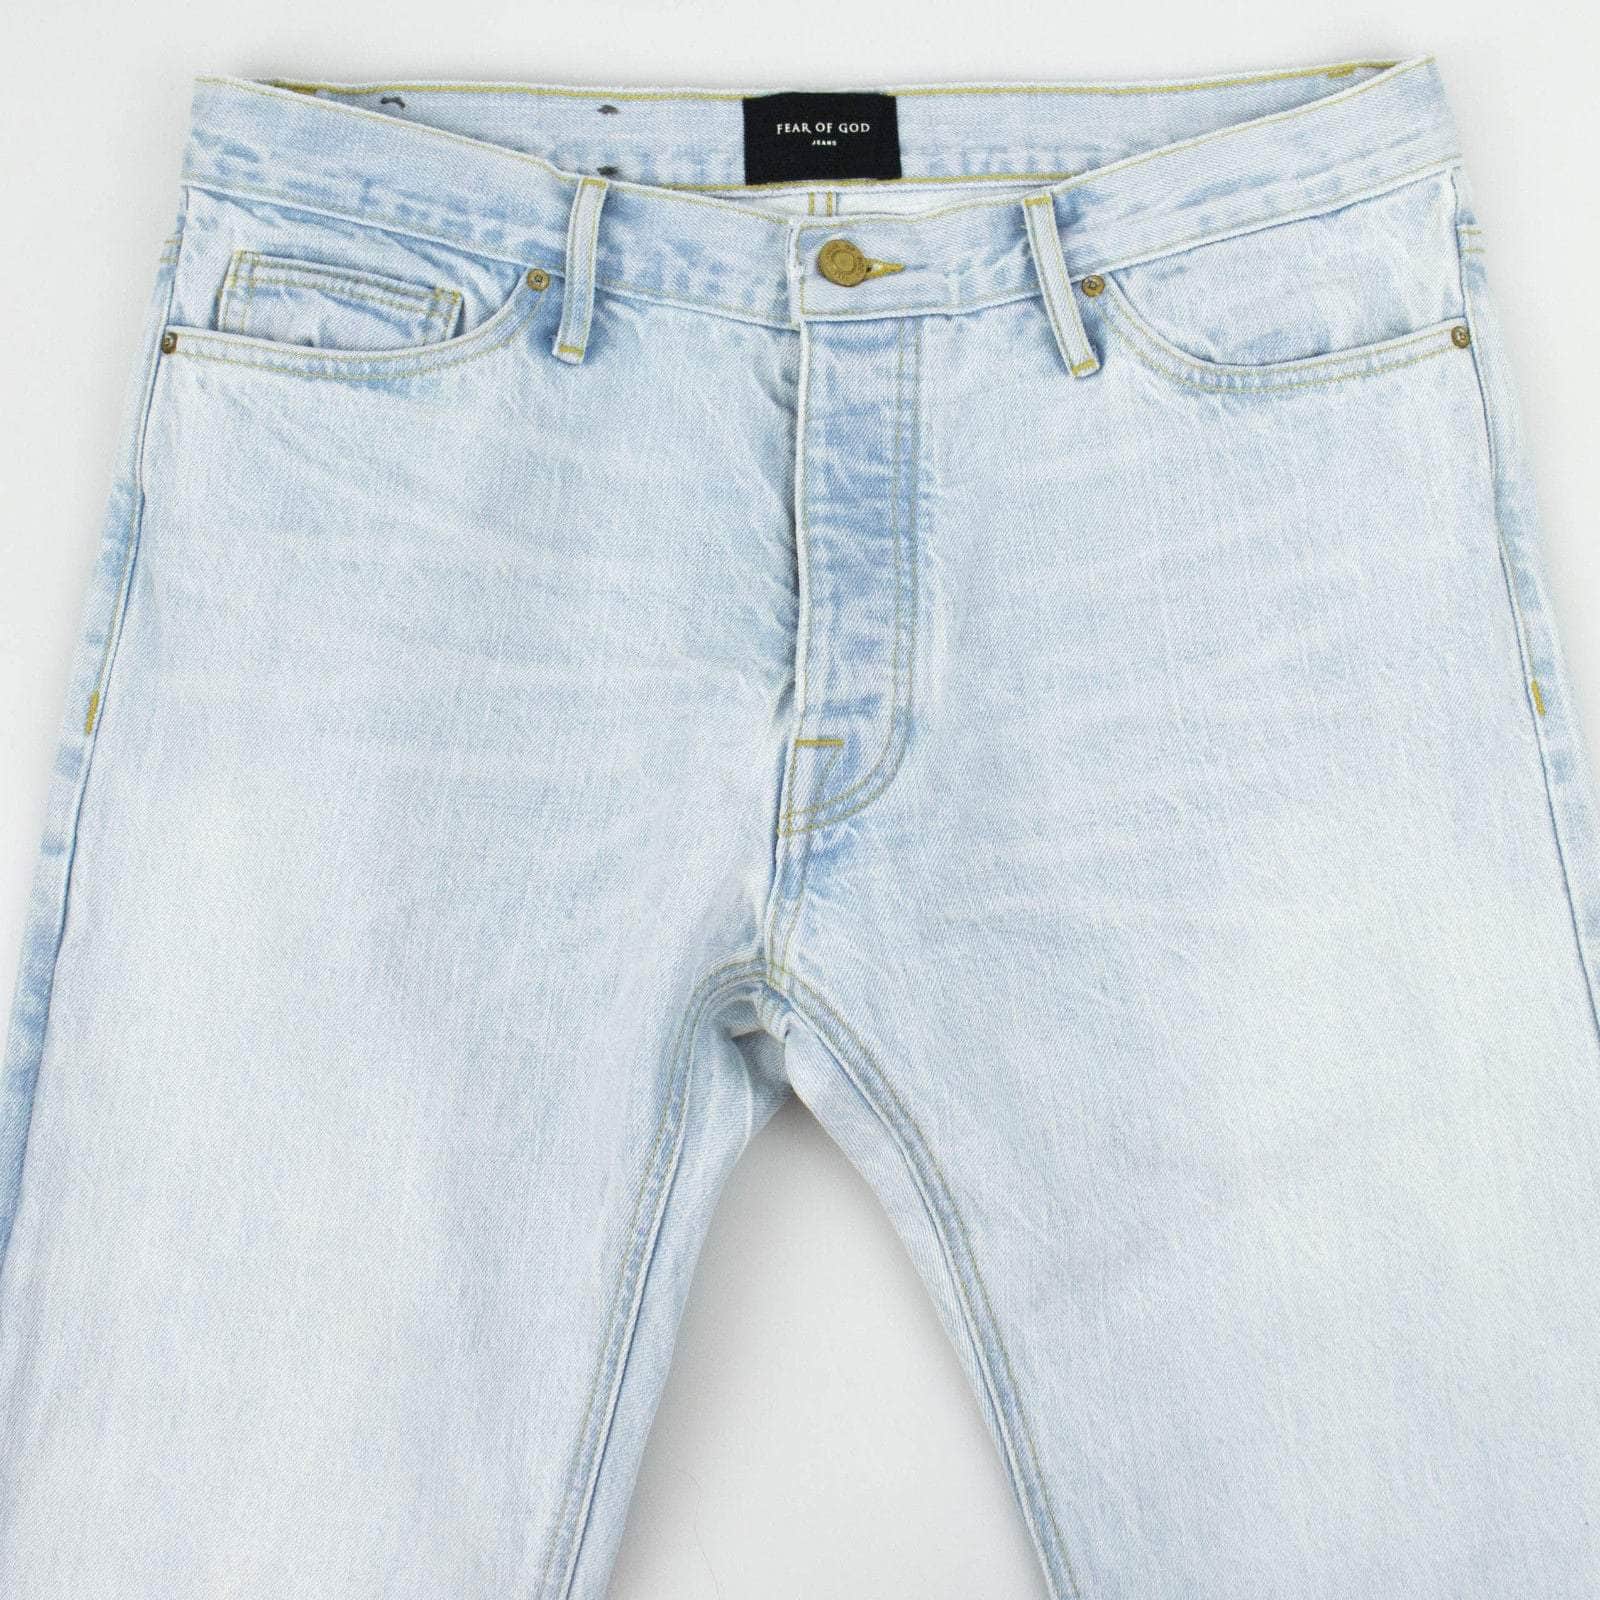 Fear Of God 250-500, channelenable-all, chicmi, couponcollection, fear-of-god, gender-mens, main-clothing, mens-shoes, mens-slim-fit-jeans, shop375, Stadium Goods 30 Fifth Collection' Cotton Denim Slim-Fit Jeans 54LE-1152/30 54LE-1152/30